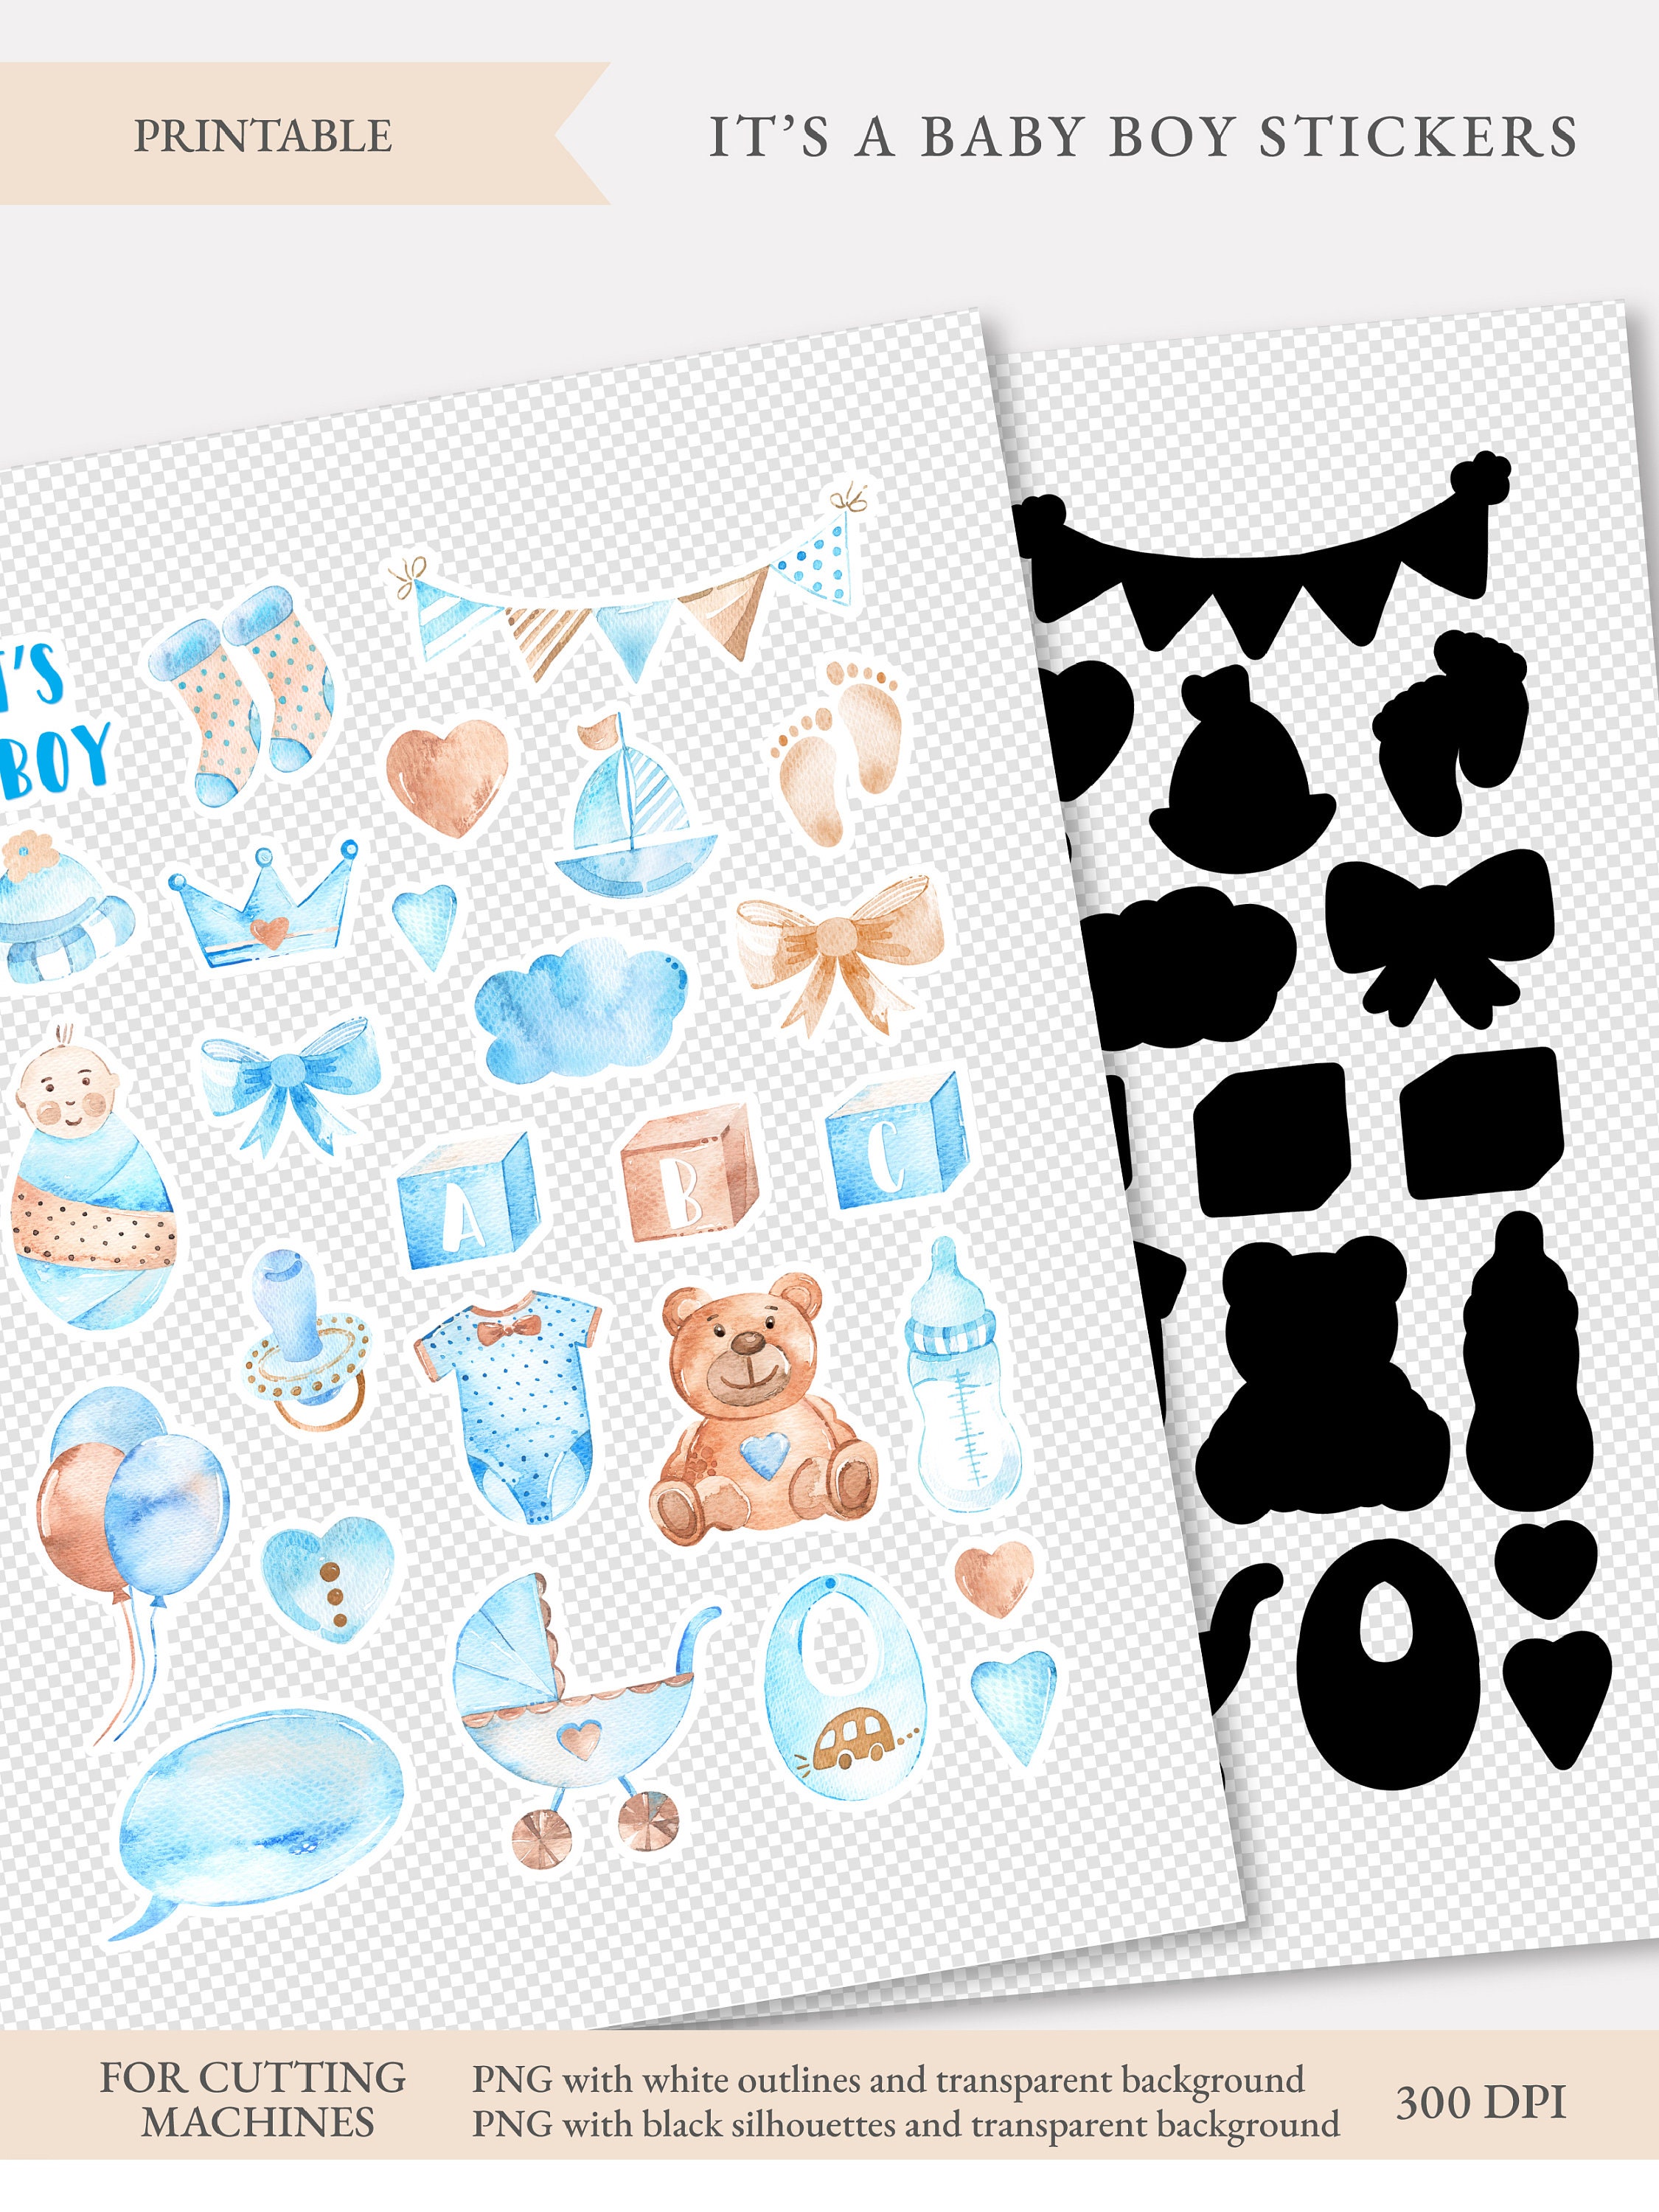 Baby Boy Stickers, New Baby Printable Bullet Journal Stickers, ITS A BOY  Png for Craft Projects, Scrapbooking 